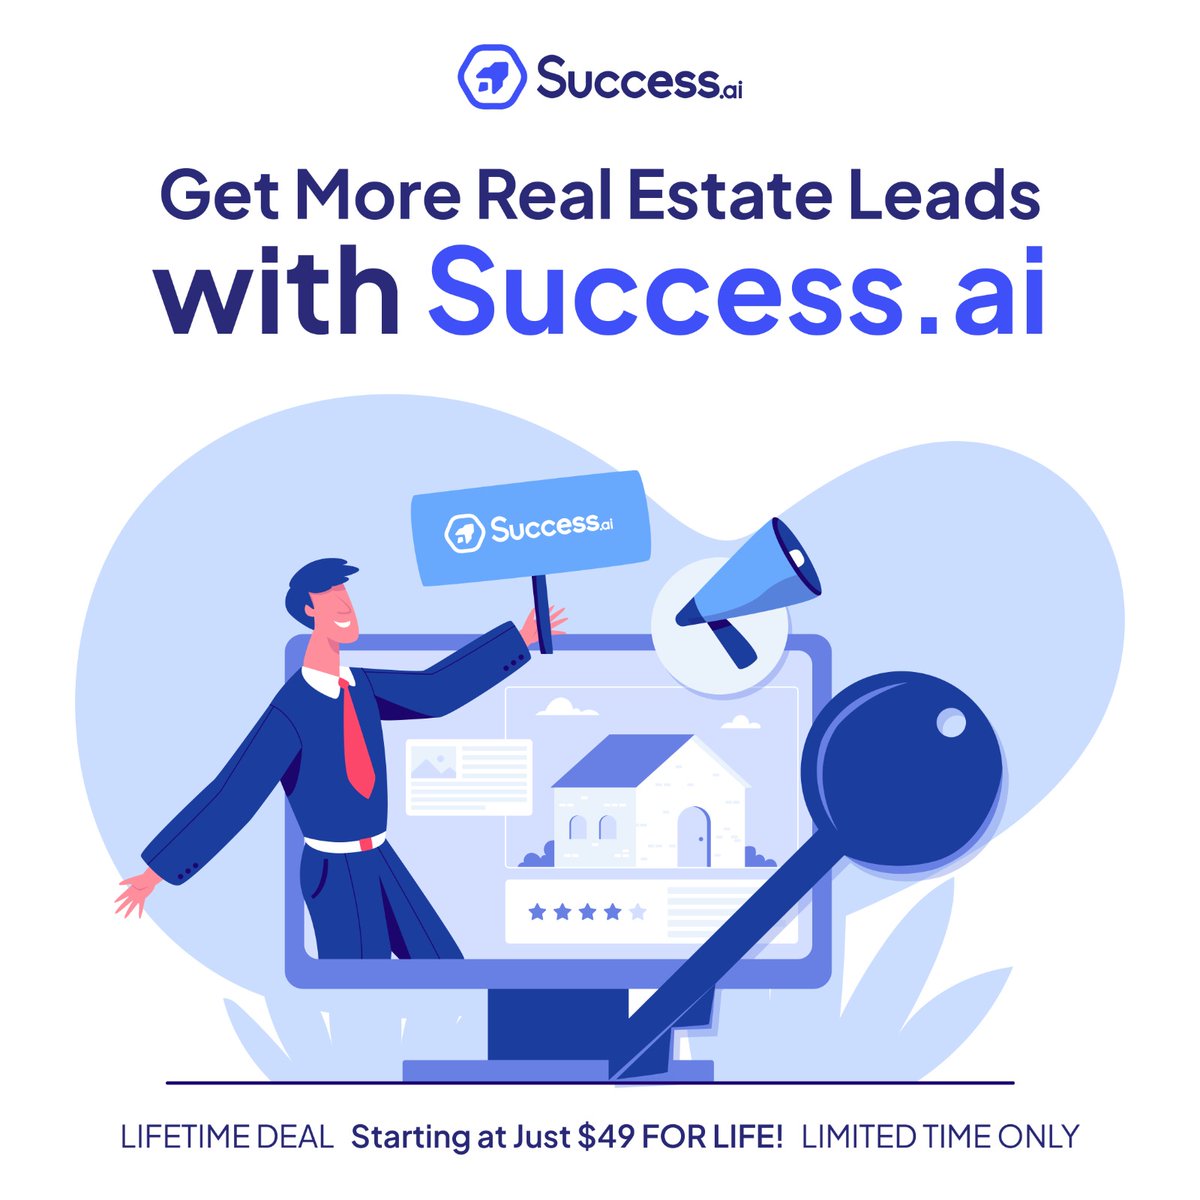 Get more leads for your real estate business with Success.ai!
GRAB Success.ai's LIFETIME DEAL-  appsumo.com/products/succe…

#AIEmailMarketing #B2BLeadGen #AIWriter #SuccessAi #ColdEmails #B2BContacts #BusinessGrowth #InformedDecisions #RealEstateLeads